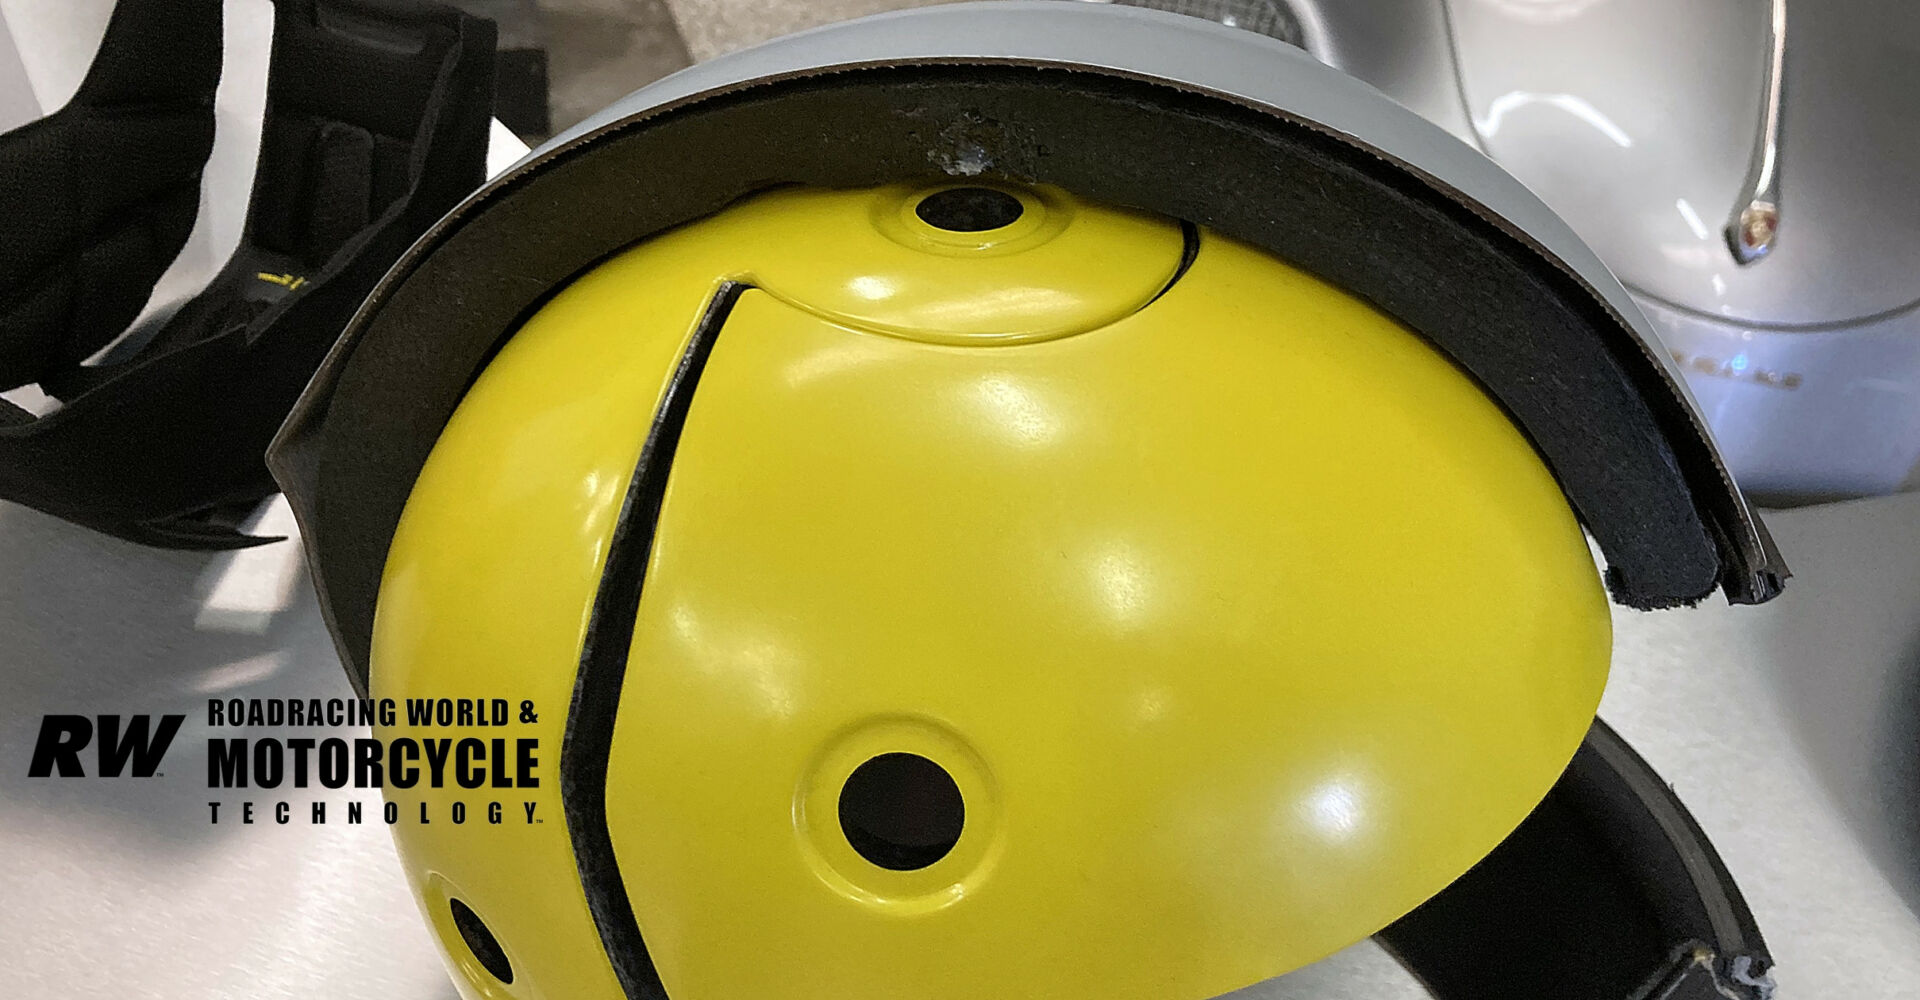 The latest Mips helmet lining is designed to reduce the amount of rotational energy transmitted to the brain. The liner is split across its entire surface and separated by a low-friction layer (yellow) that allows the head to move 10mm to 15mm in an impact. A second split across the top of the head allows for a second axis of movement. Photo by Michael Gougis.